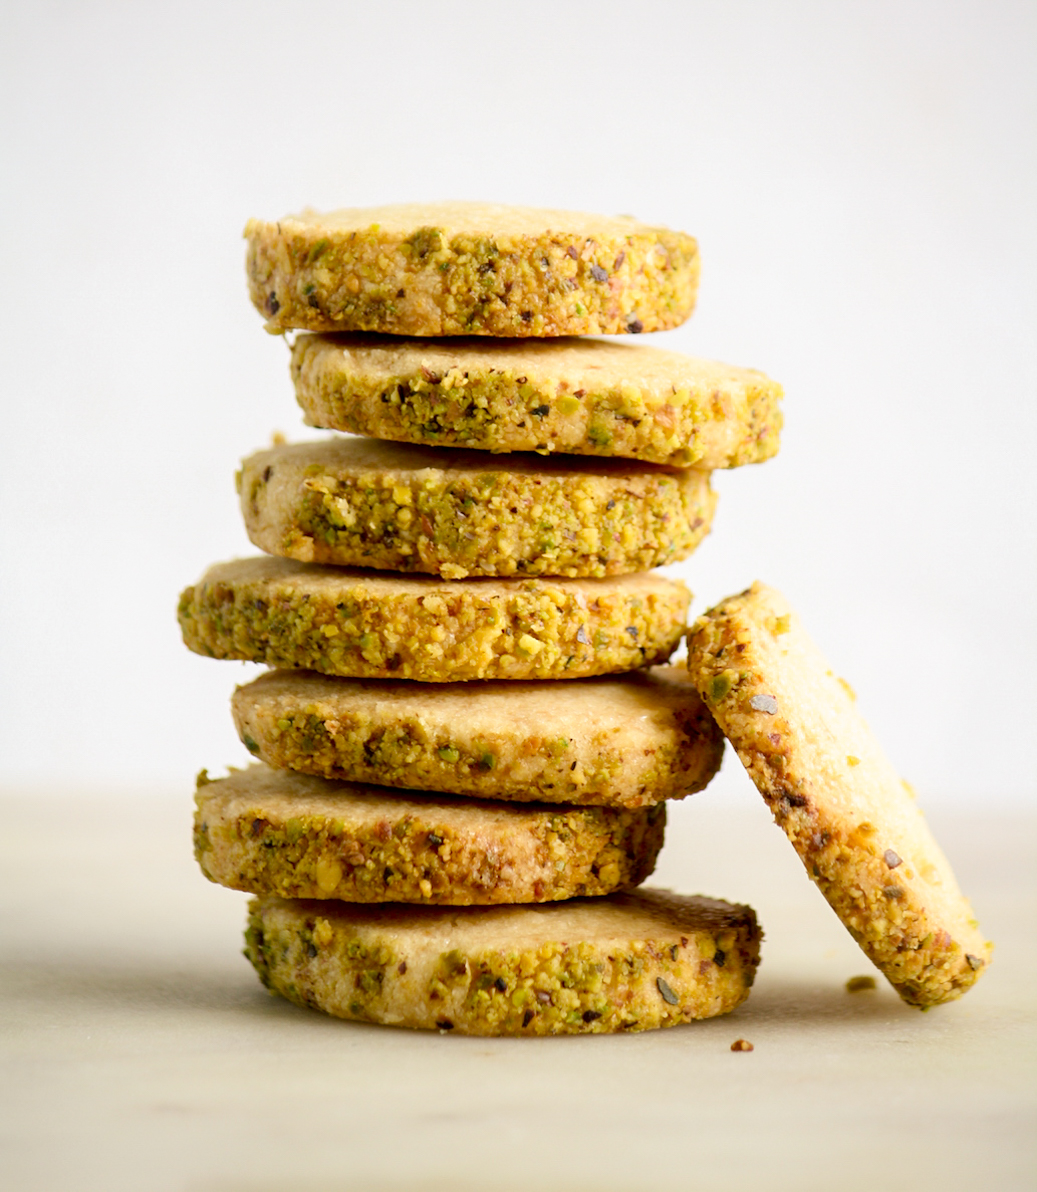 Classic, crumbly butter biscuits coated in pistachios